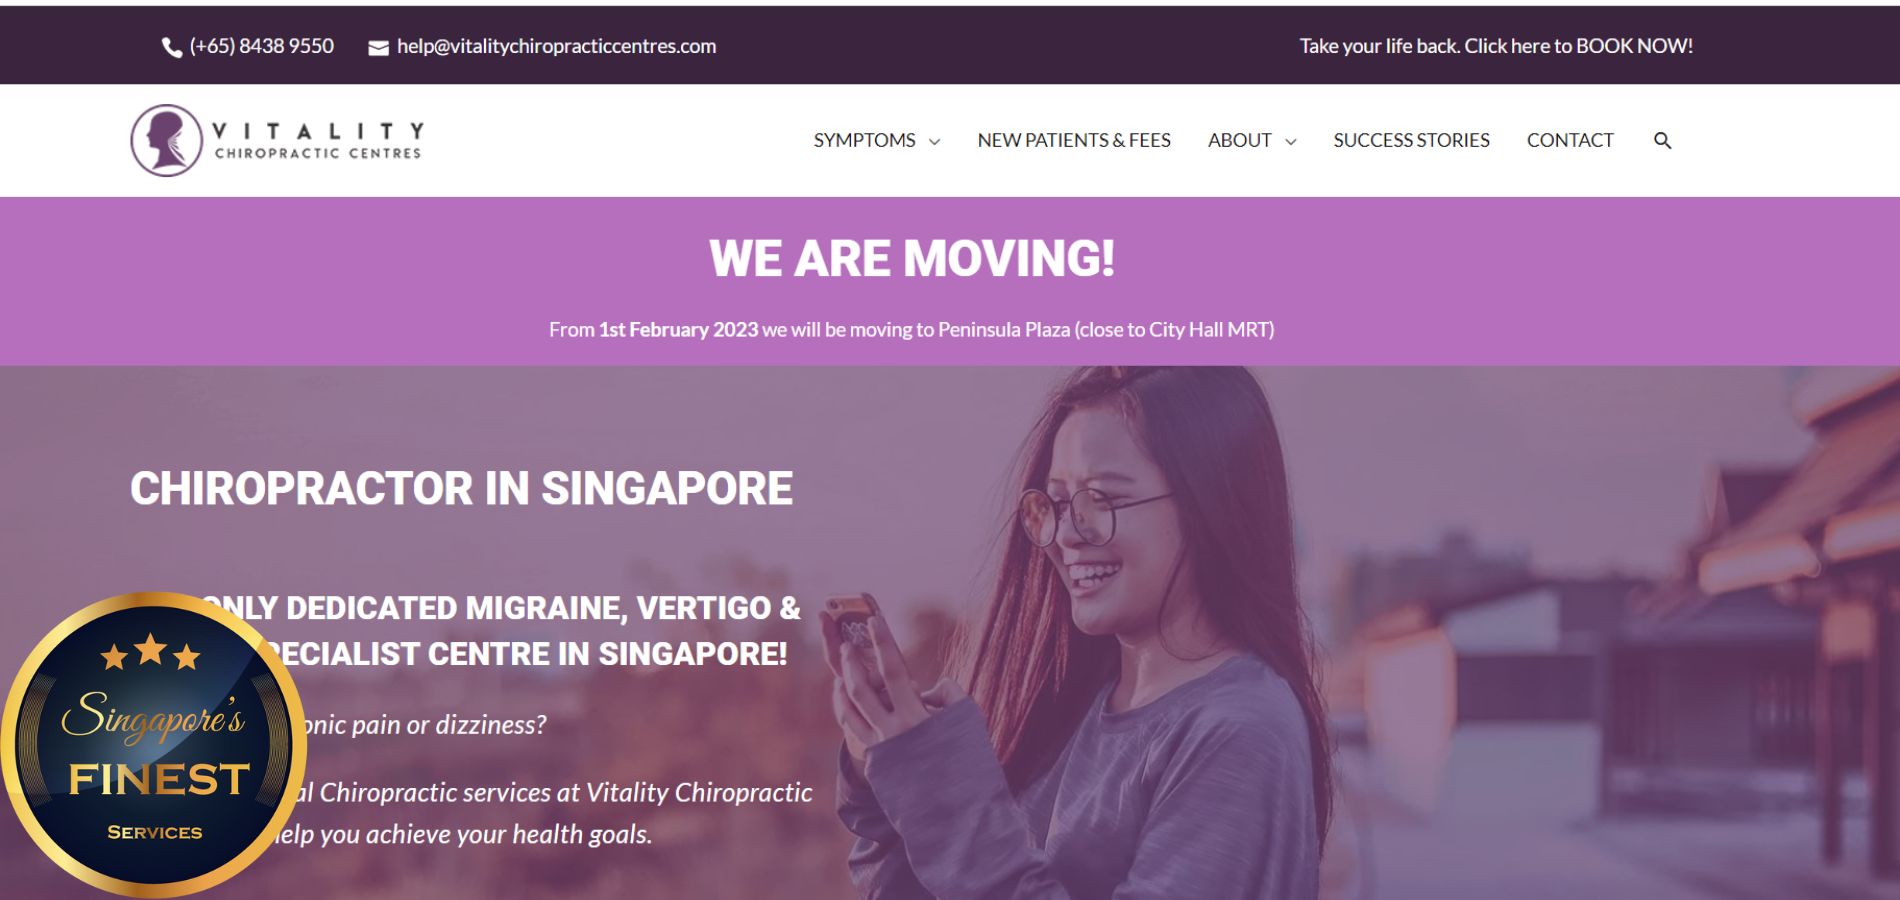 Vitality Chiropractic Centres - Best Chiropractors in Singapore